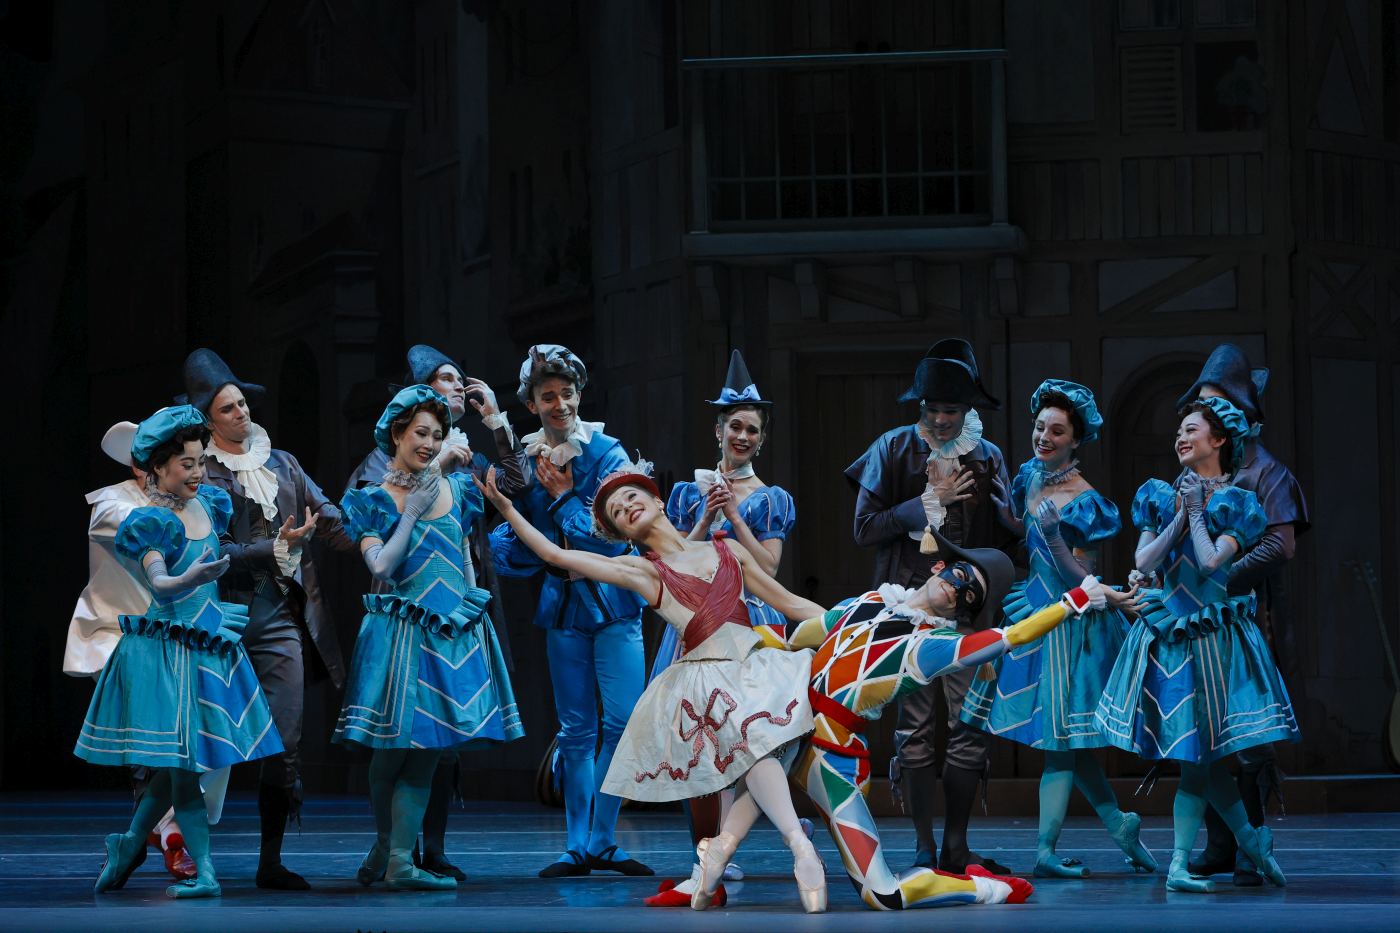 1. B.Bemet (Columbine), B.Chynoweth (Harlequin), and ensemble, “Harlequinade” by M.Petipa, additional choreography by A.Ratmansky; The Australian Ballet 2022 © J.Busby